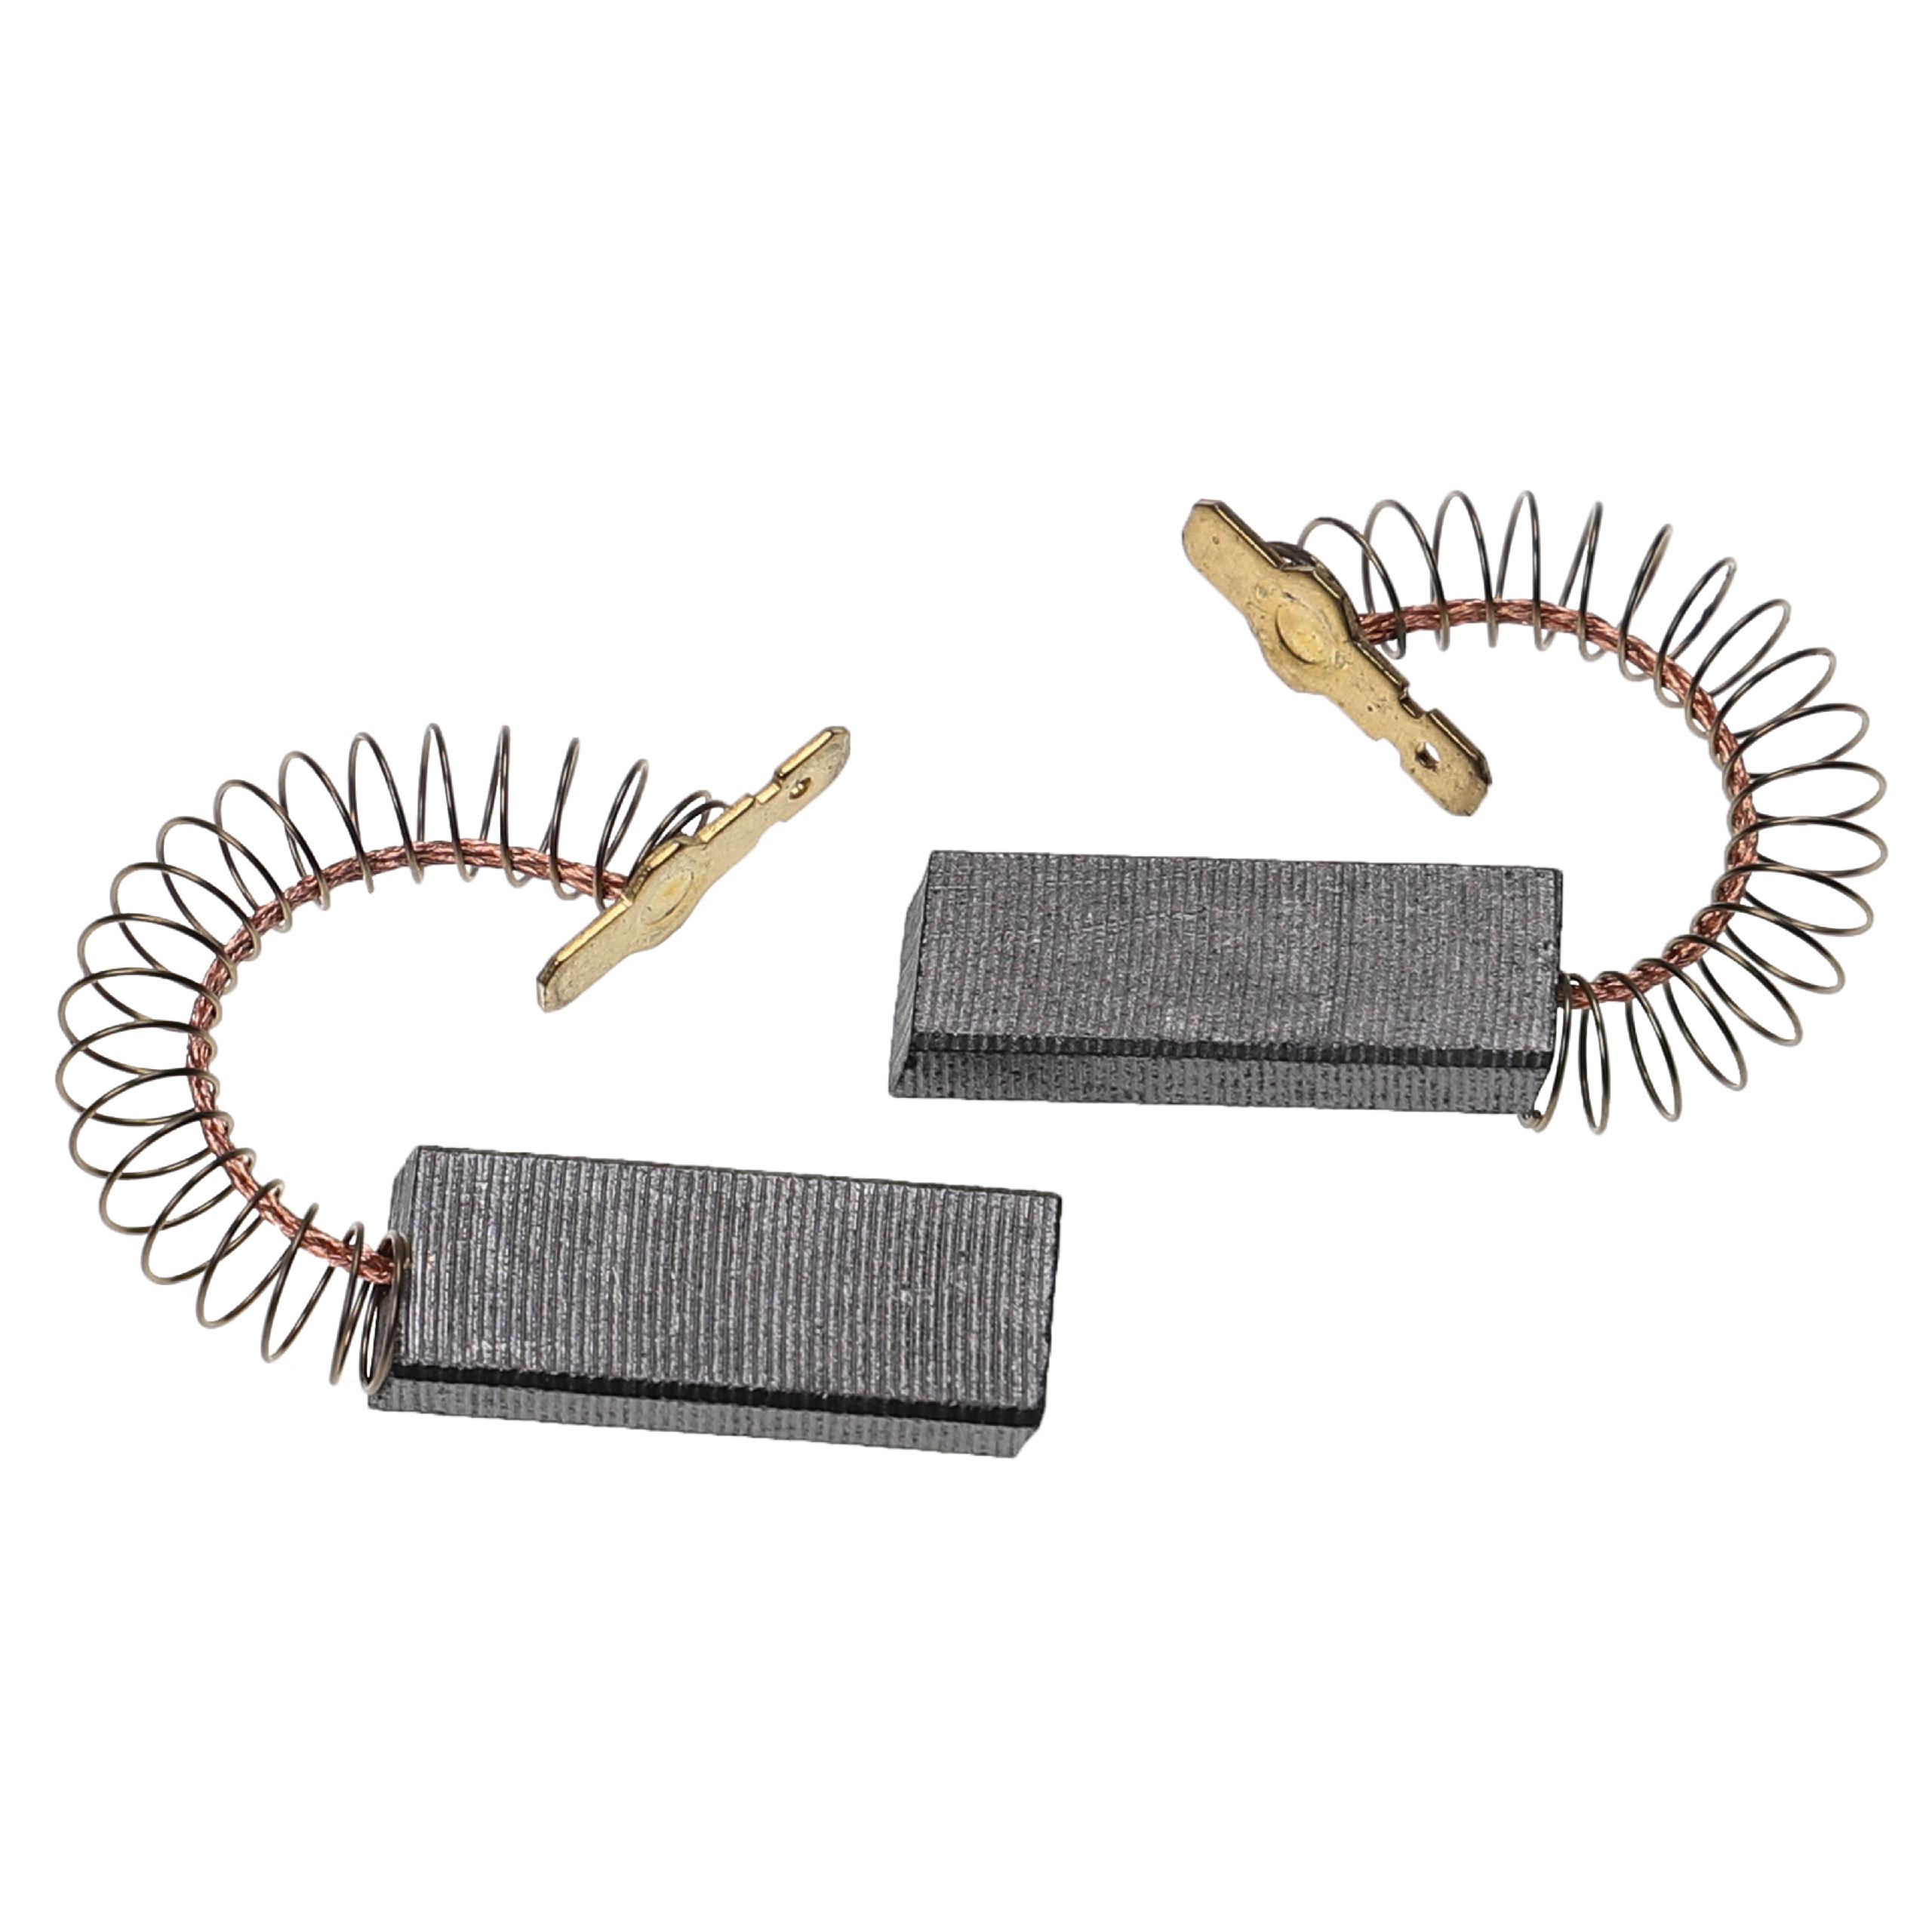 2x Carbon Brush as Replacement for 00154740 Electric Power Tools + Spring, 5 x 12.5 x 32mm